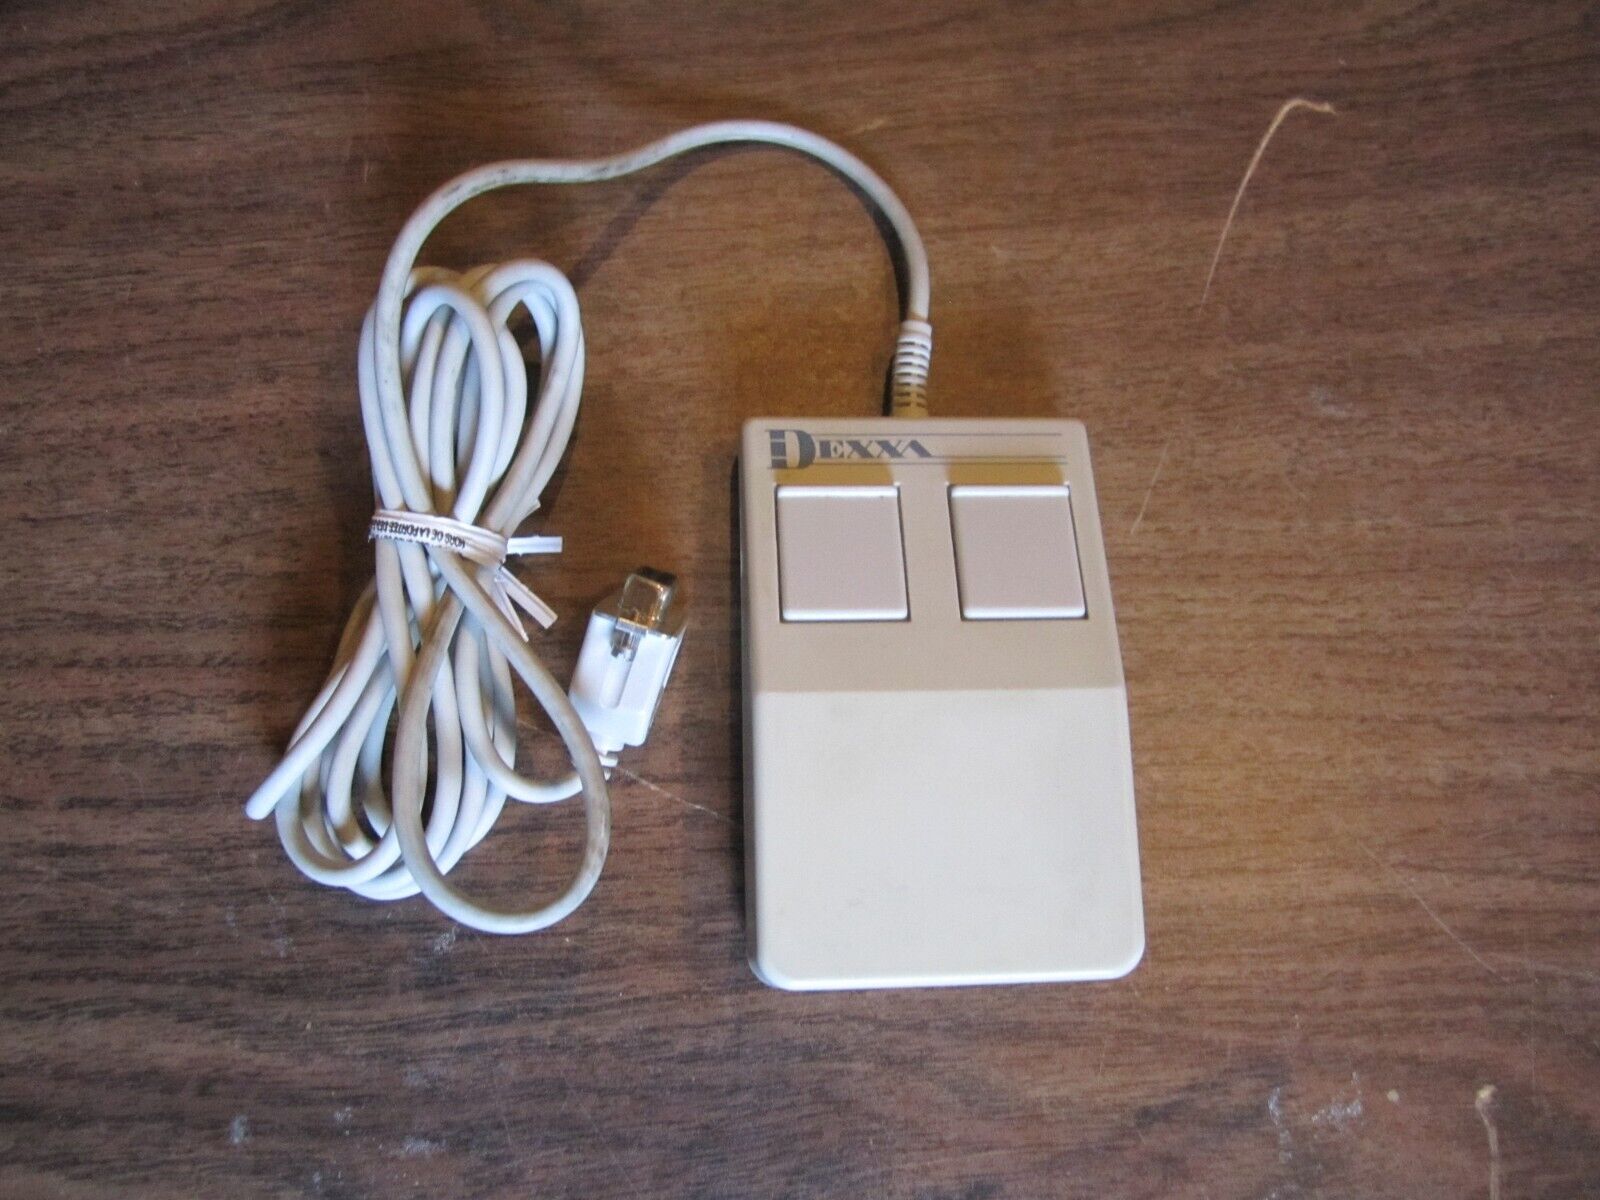 Vintage Dexxa 2 Button Serial Mouse Model: MB-82-9F